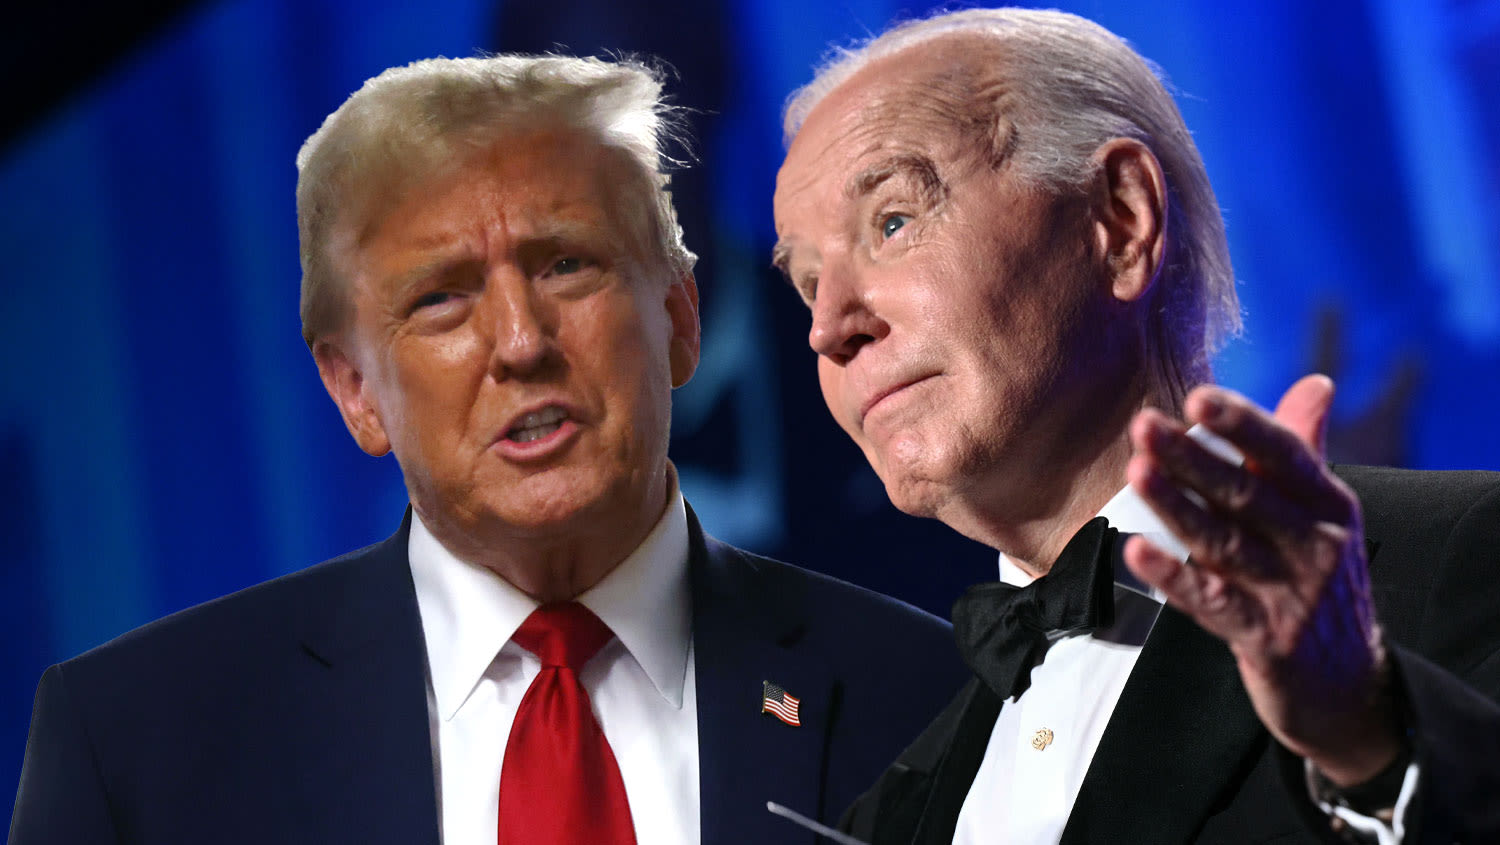 Donald Trump Bemoans “Really Bad” WHCD, Biden & Colin Jost After All Mock Much Indicted Ex-POTUS